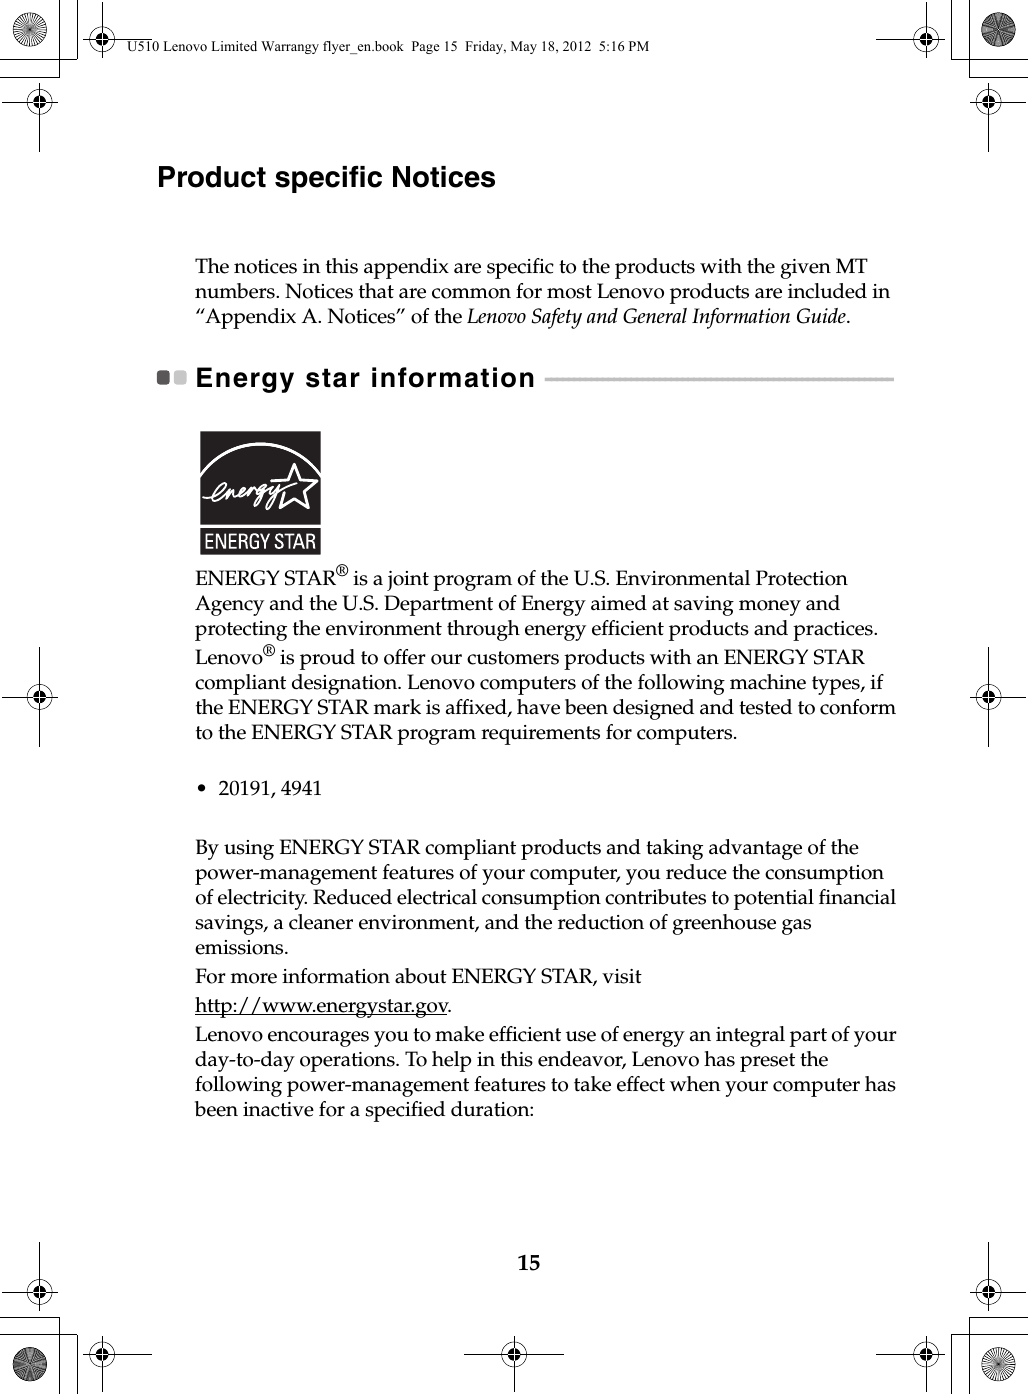 15Product specific NoticesThe notices in this appendix are specific to the products with the given MT numbers. Notices that are common for most Lenovo products are included in “Appendix A. Notices” of the Lenovo Safety and General Information Guide.Energy star information  - - - - - - - - - - - - - - - - - - - - - - - - - - - - - - - - - - - - - - - - - - - - - - - - - - - - - - - - - - - - - ENERGY STAR® is a joint program of the U.S. Environmental Protection Agency and the U.S. Department of Energy aimed at saving money and protecting the environment through energy efficient products and practices.Lenovo® is proud to offer our customers products with an ENERGY STAR compliant designation. Lenovo computers of the following machine types, if the ENERGY STAR mark is affixed, have been designed and tested to conform to the ENERGY STAR program requirements for computers.• 20191, 4941By using ENERGY STAR compliant products and taking advantage of the power-management features of your computer, you reduce the consumption of electricity. Reduced electrical consumption contributes to potential financial savings, a cleaner environment, and the reduction of greenhouse gas emissions.For more information about ENERGY STAR, visithttp://www.energystar.gov.Lenovo encourages you to make efficient use of energy an integral part of your day-to-day operations. To help in this endeavor, Lenovo has preset the following power-management features to take effect when your computer has been inactive for a specified duration:U510 Lenovo Limited Warrangy flyer_en.book  Page 15  Friday, May 18, 2012  5:16 PM